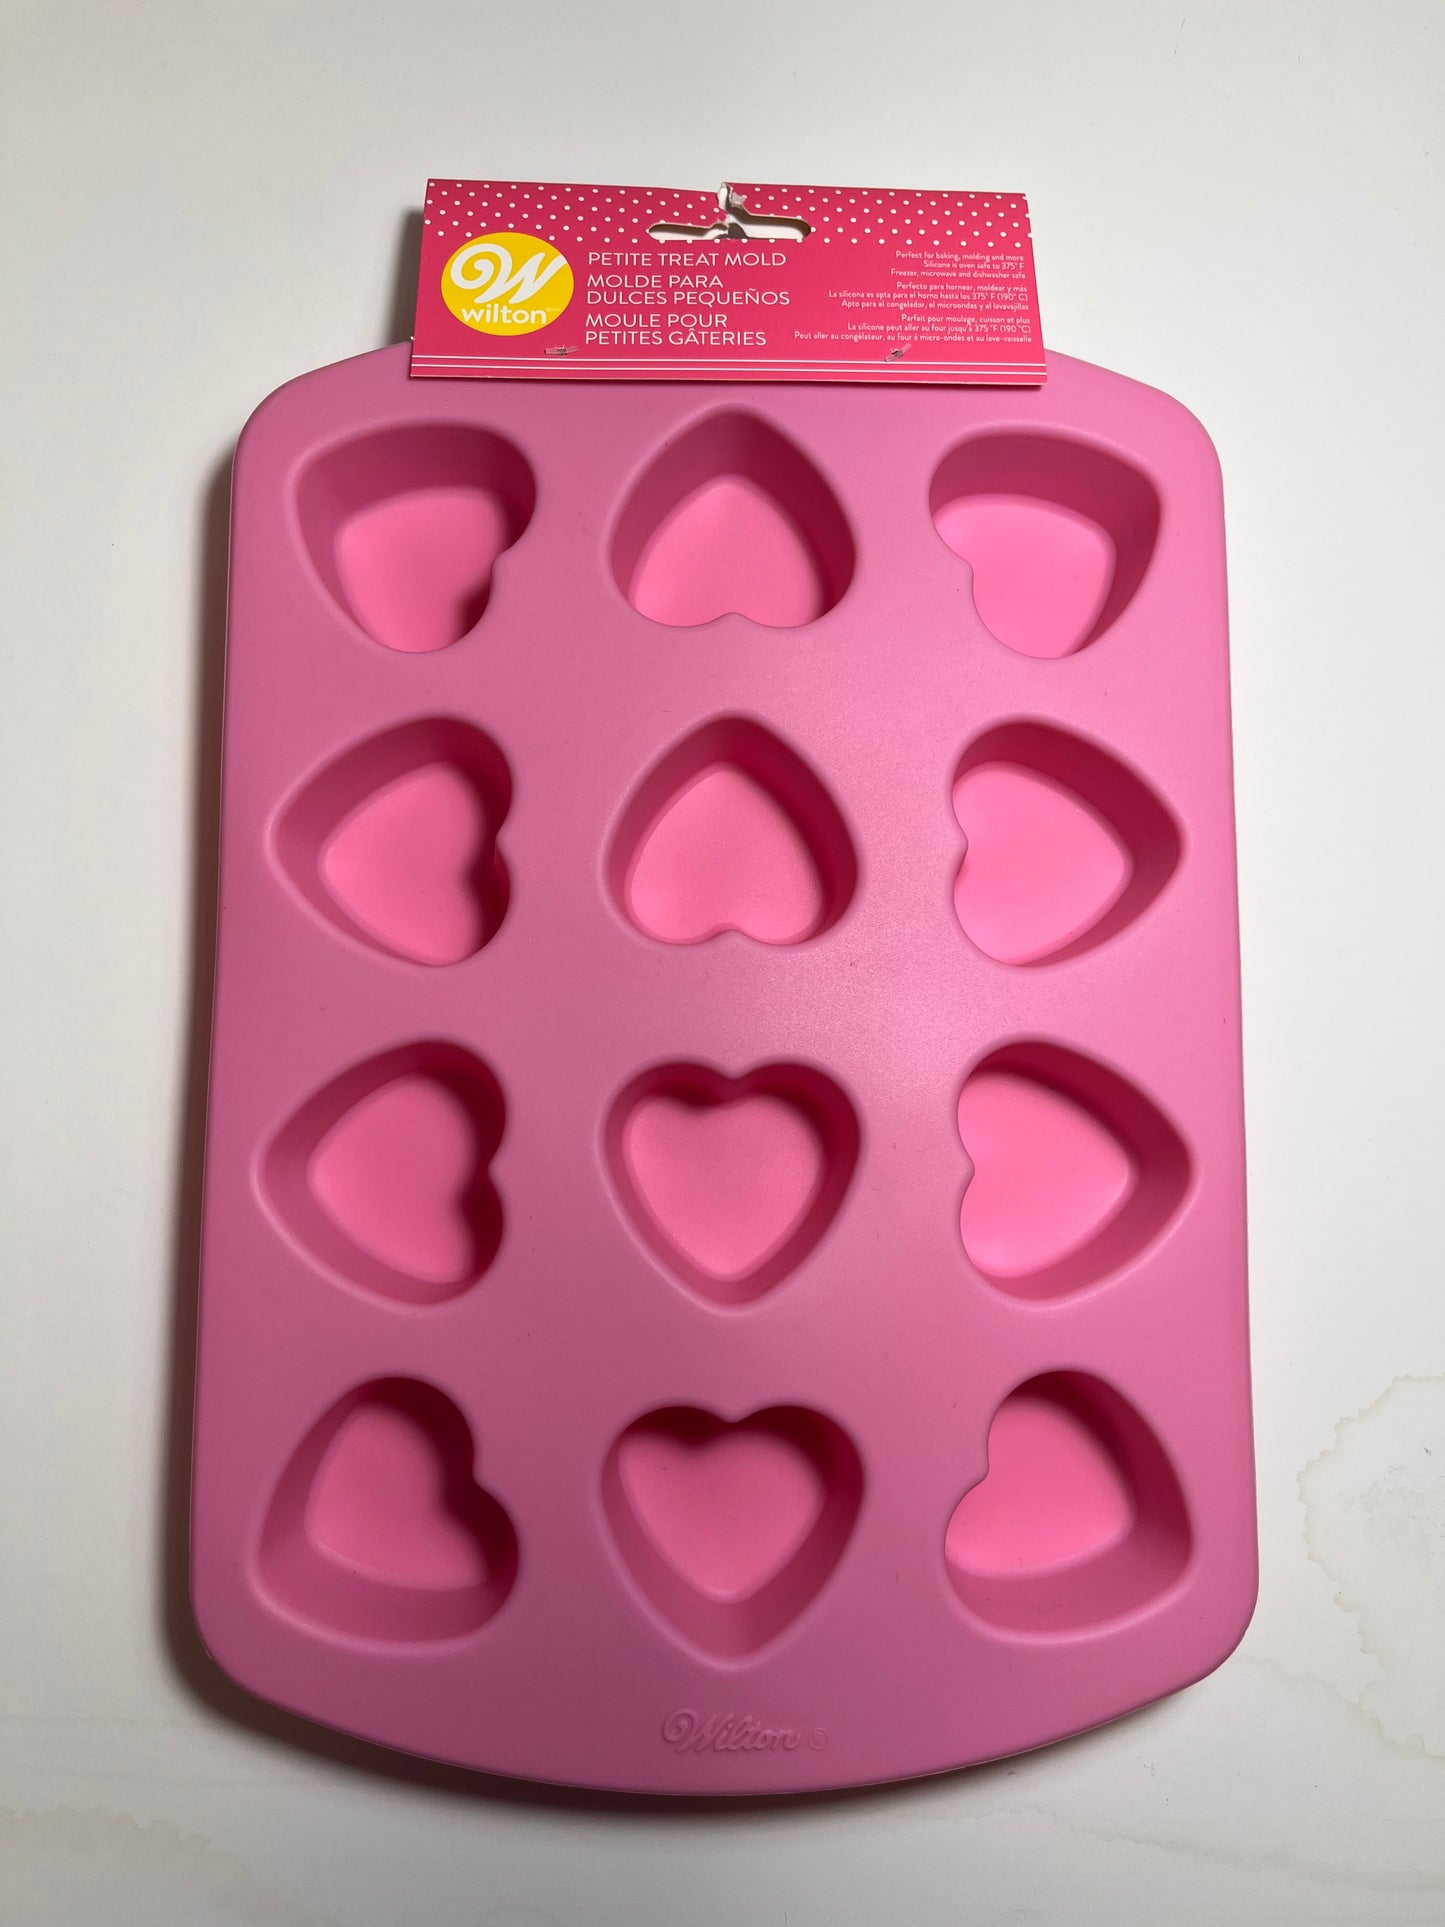 Silicone mold with mini hearts.  12 cavity.  each heart is about 1.5inches.  Great for bite size sweets.  Petite treat mold